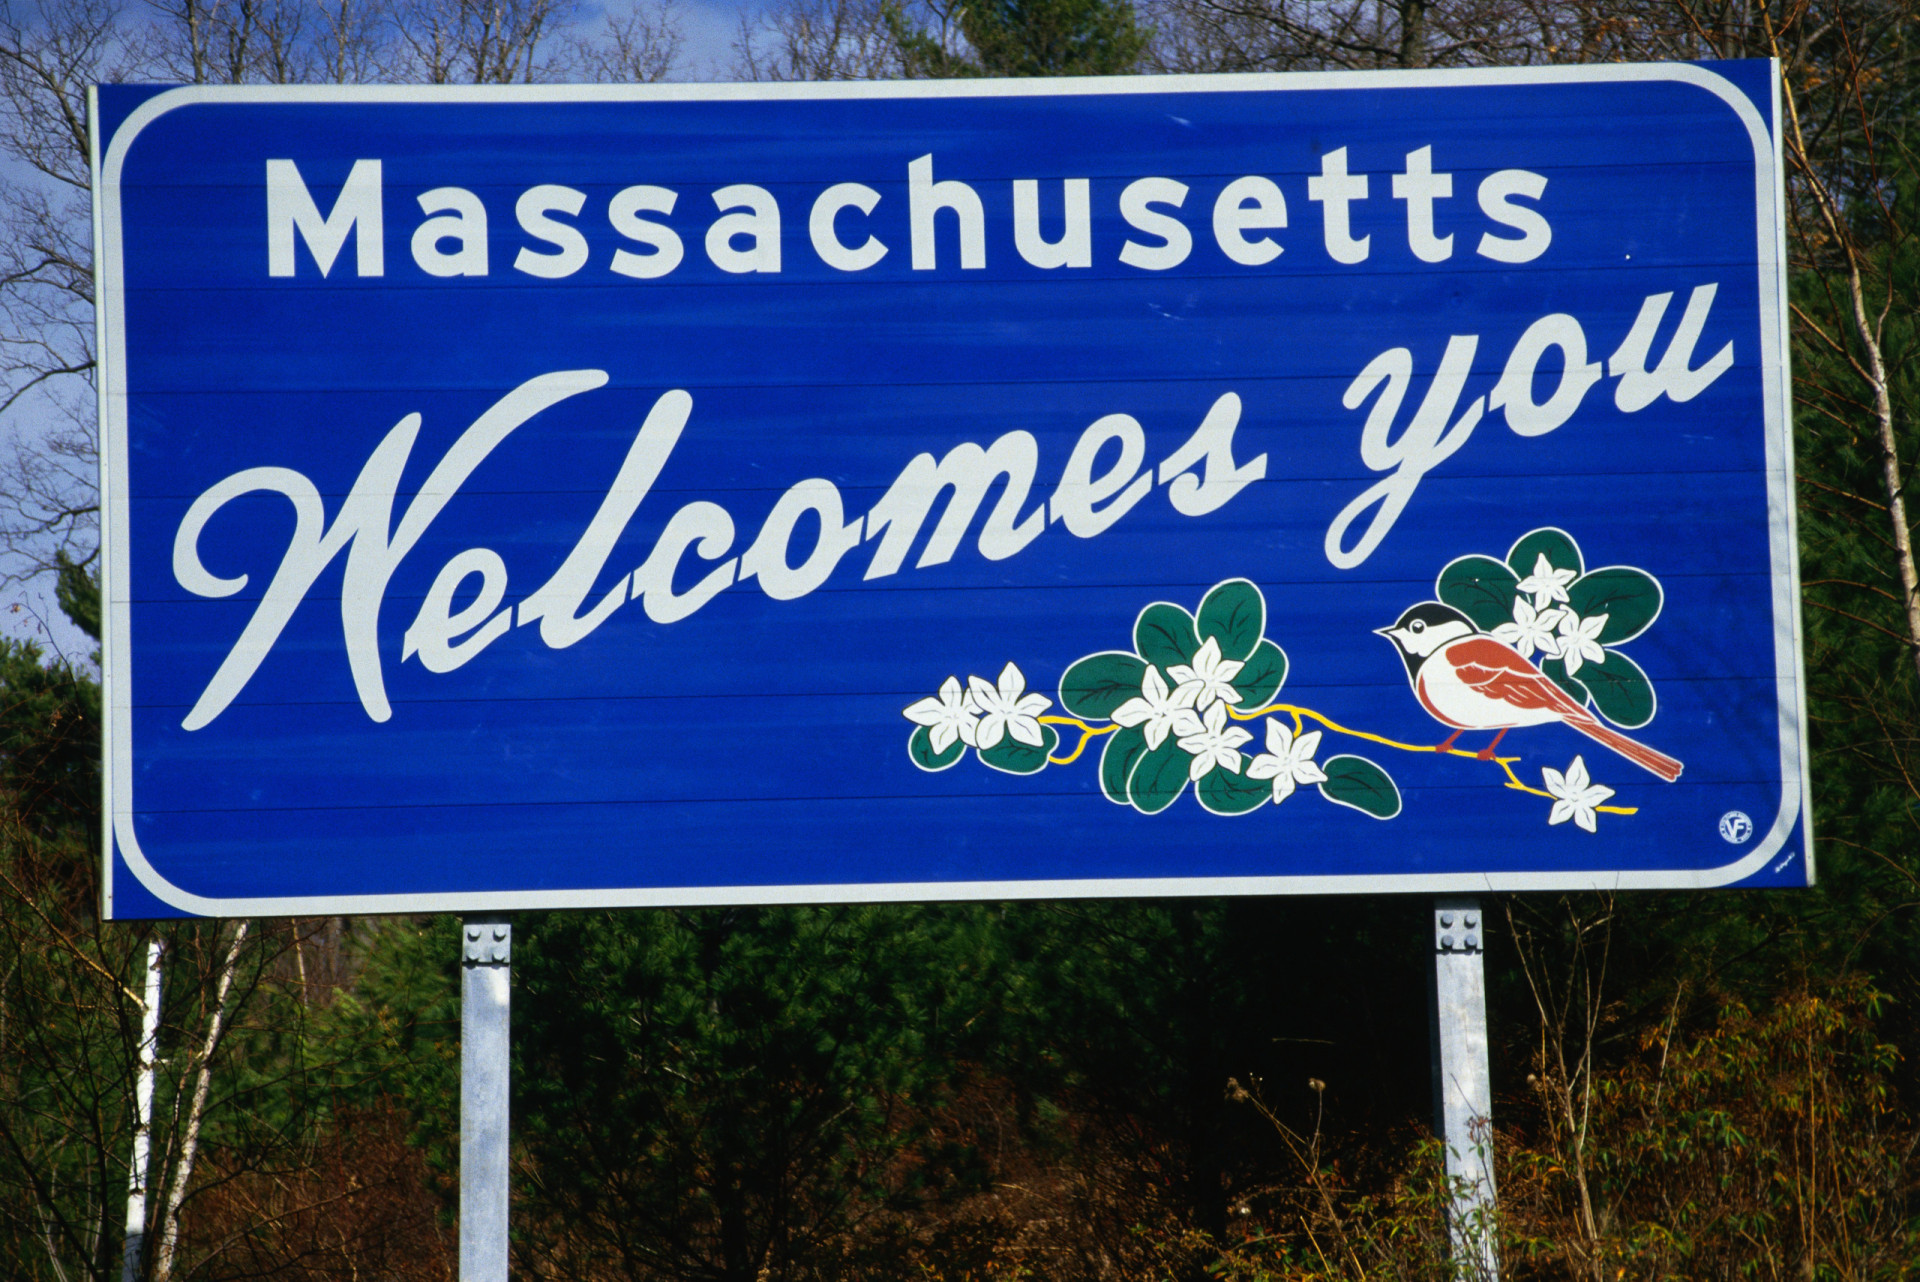 <p>The Massachusetts welcome sign sports two symbols of the state: the chickadee and the mayflower.</p><p><a href="https://www.msn.com/en-us/community/channel/vid-7xx8mnucu55yw63we9va2gwr7uihbxwc68fxqp25x6tg4ftibpra?cvid=94631541bc0f4f89bfd59158d696ad7e">Follow us and access great exclusive content every day</a></p>